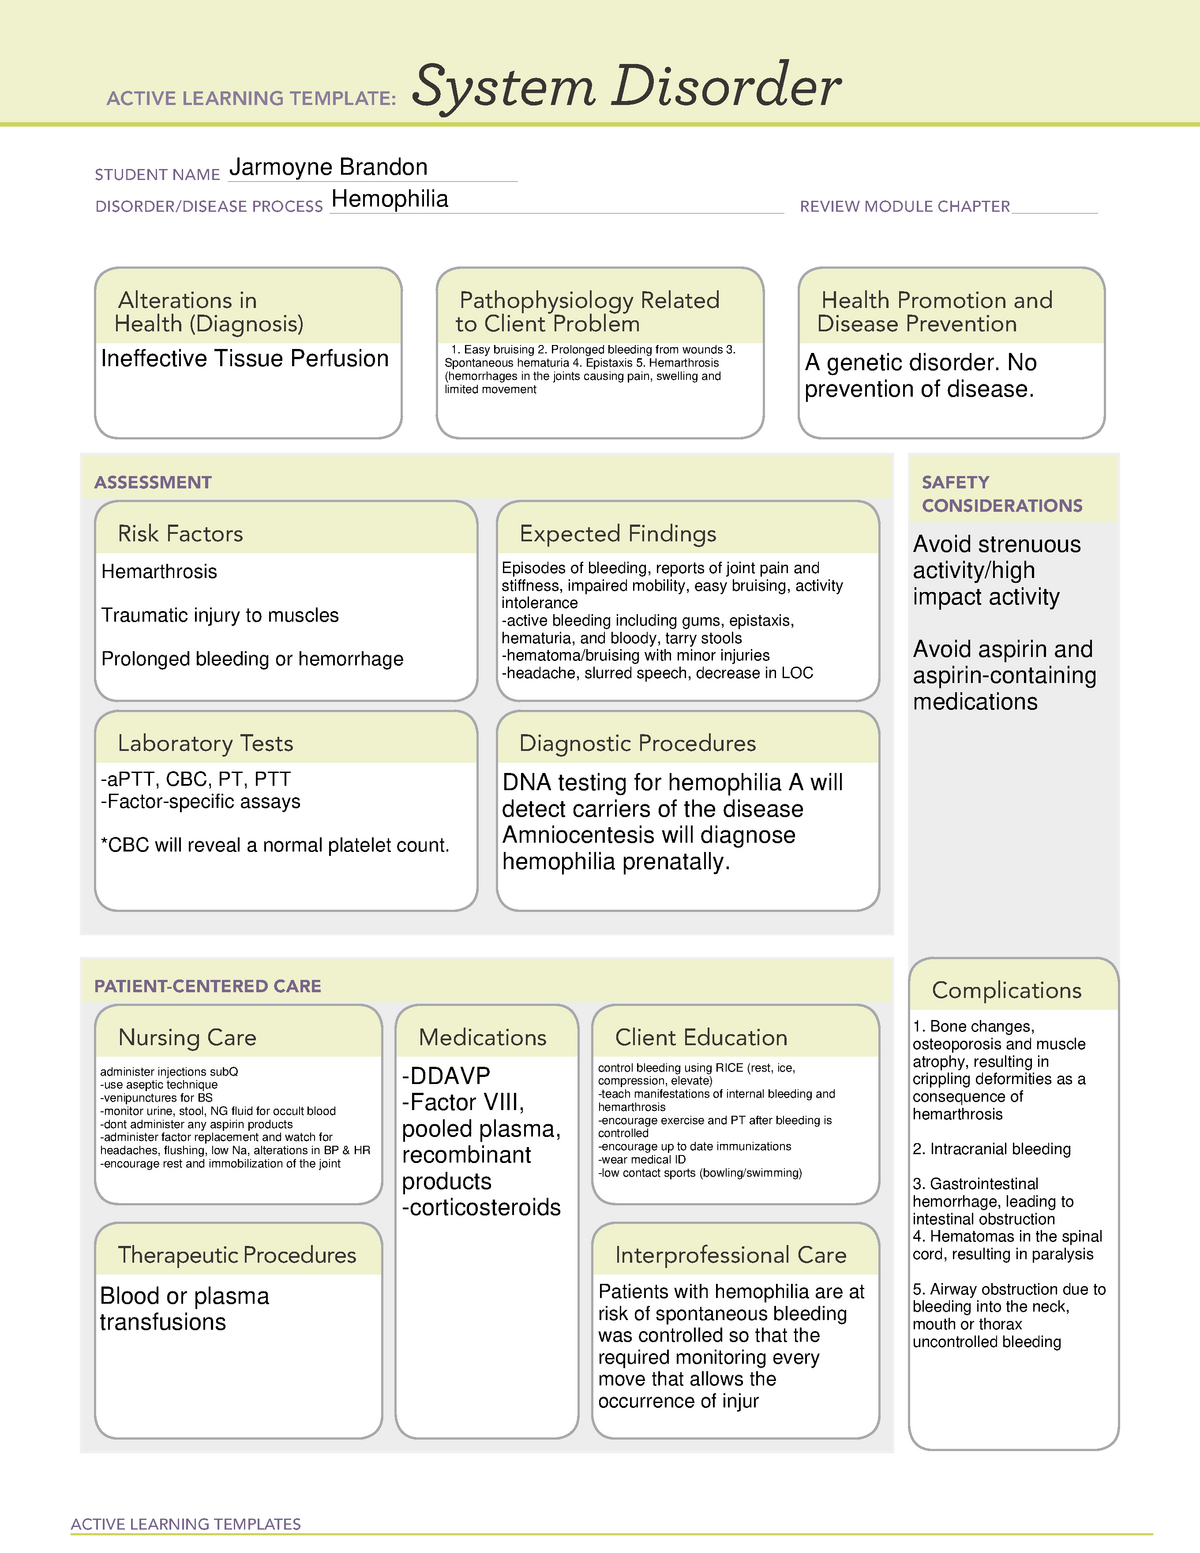 PN II Clinical System Disorder Hemophilia ACTIVE LEARNING TEMPLATES